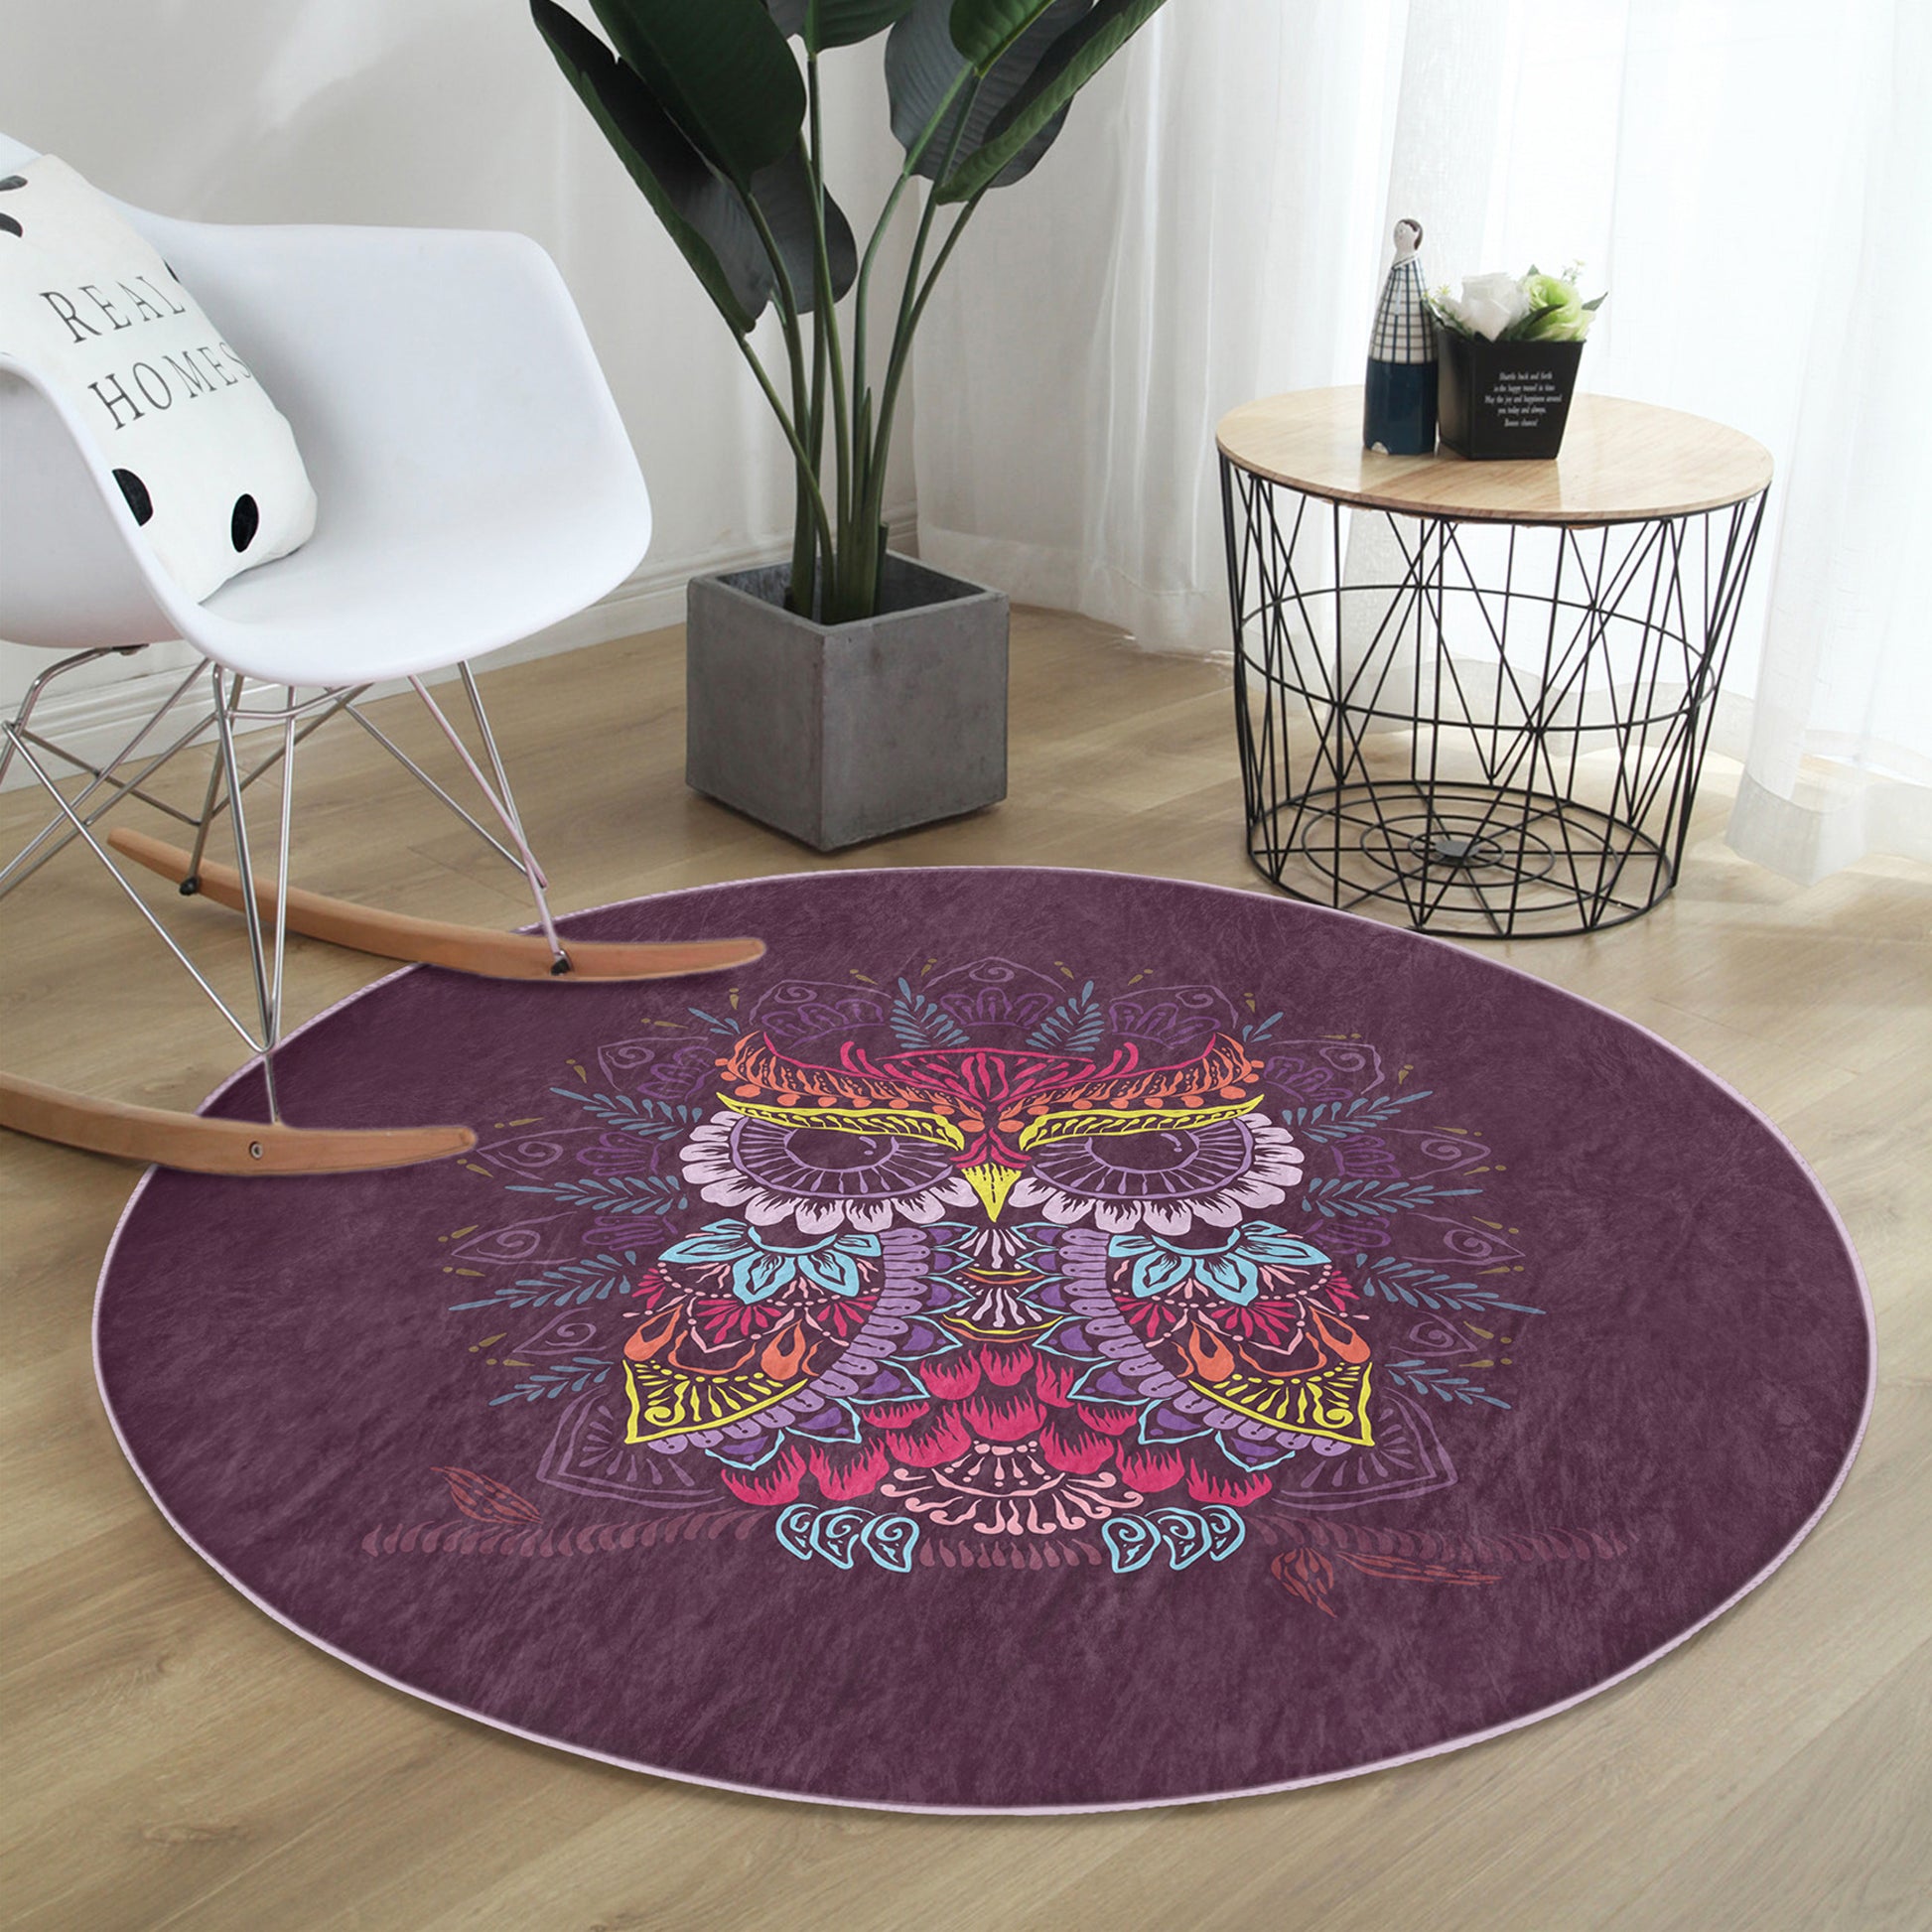 Washable Rug with Owl Design - Easy Maintenance